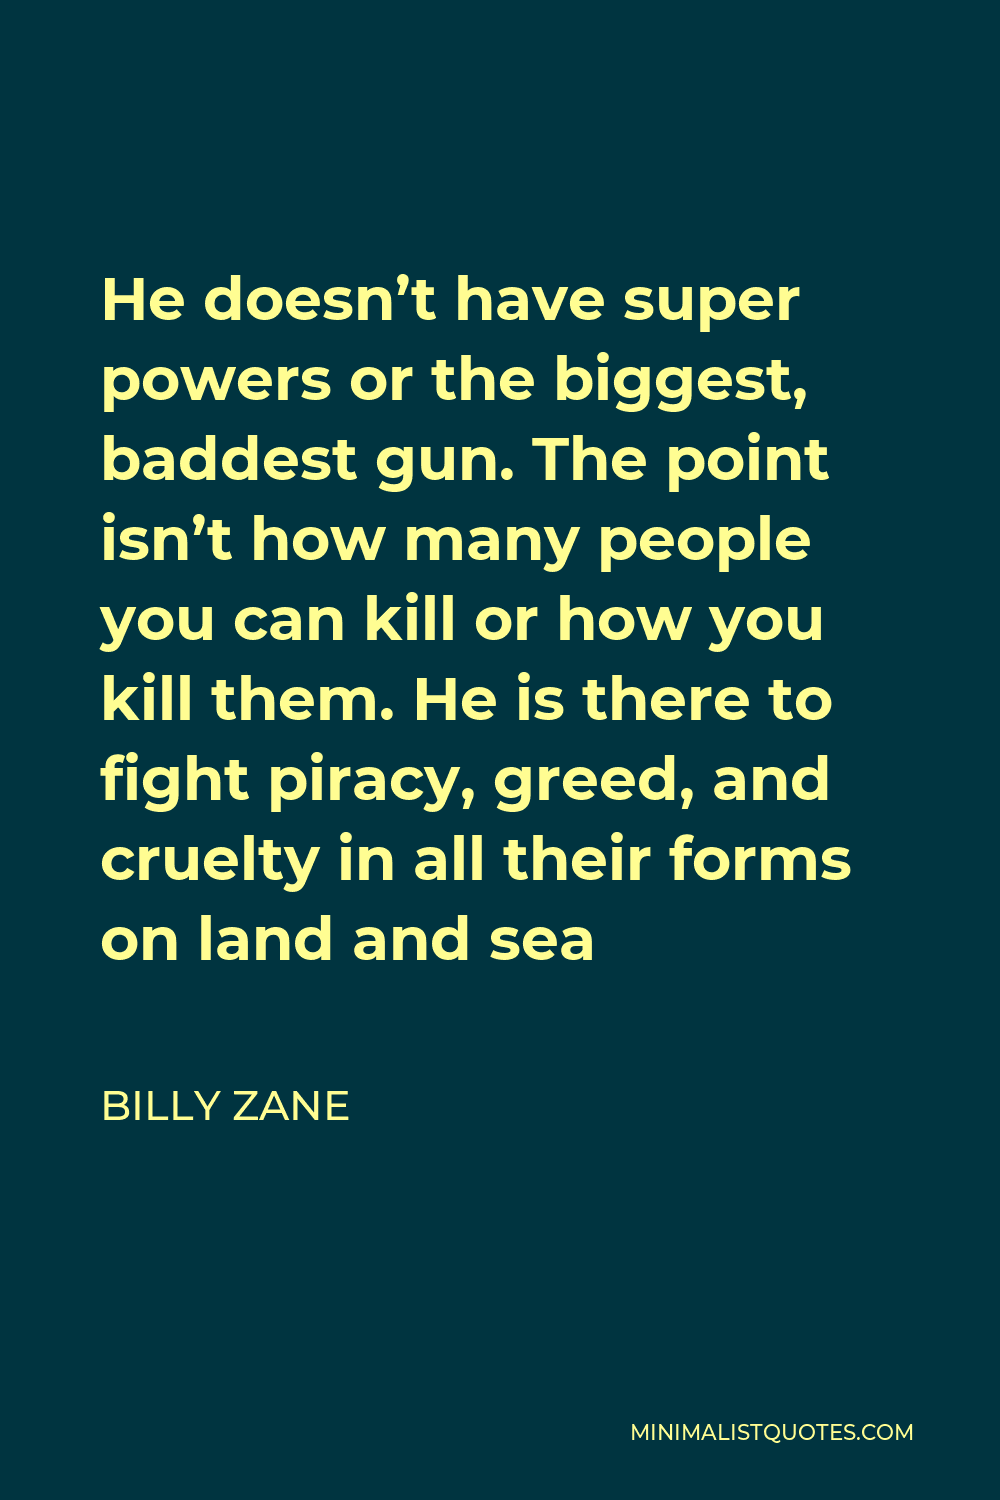 Billy Zane Quote - He doesn’t have super powers or the biggest, baddest gun. The point isn’t how many people you can kill or how you kill them. He is there to fight piracy, greed, and cruelty in all their forms on land and sea